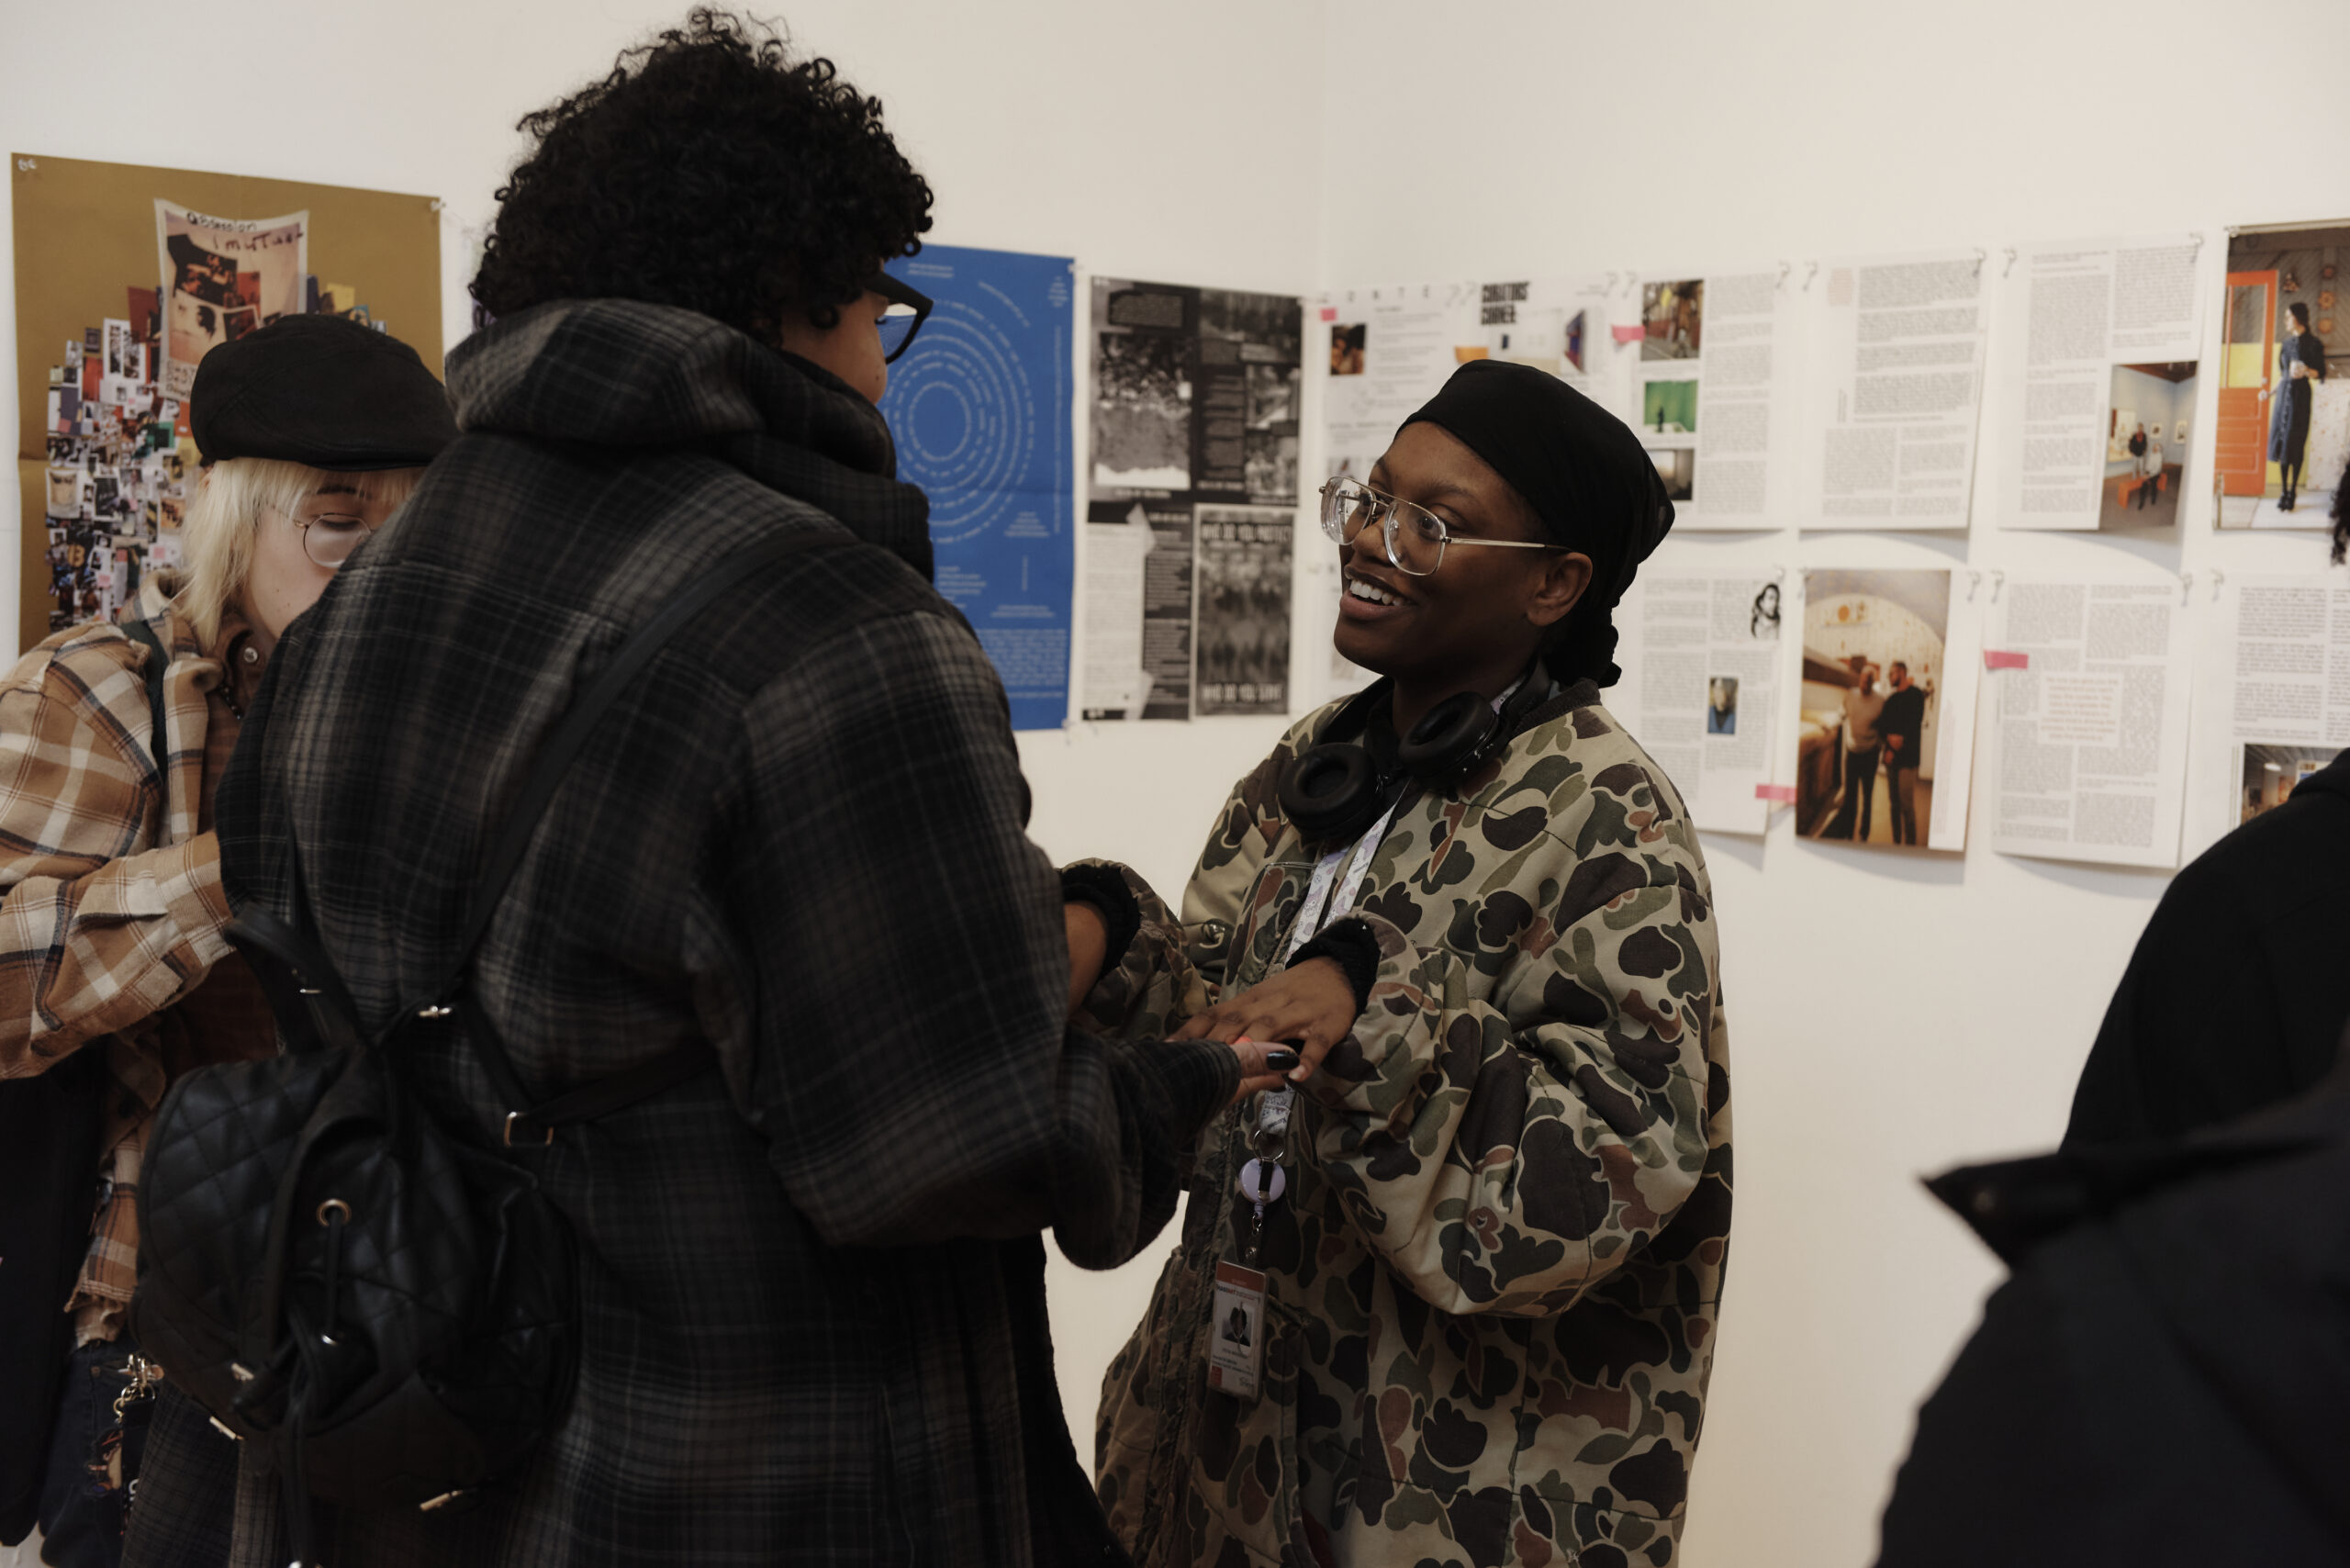 A close-up of two people chatting in a gallery.